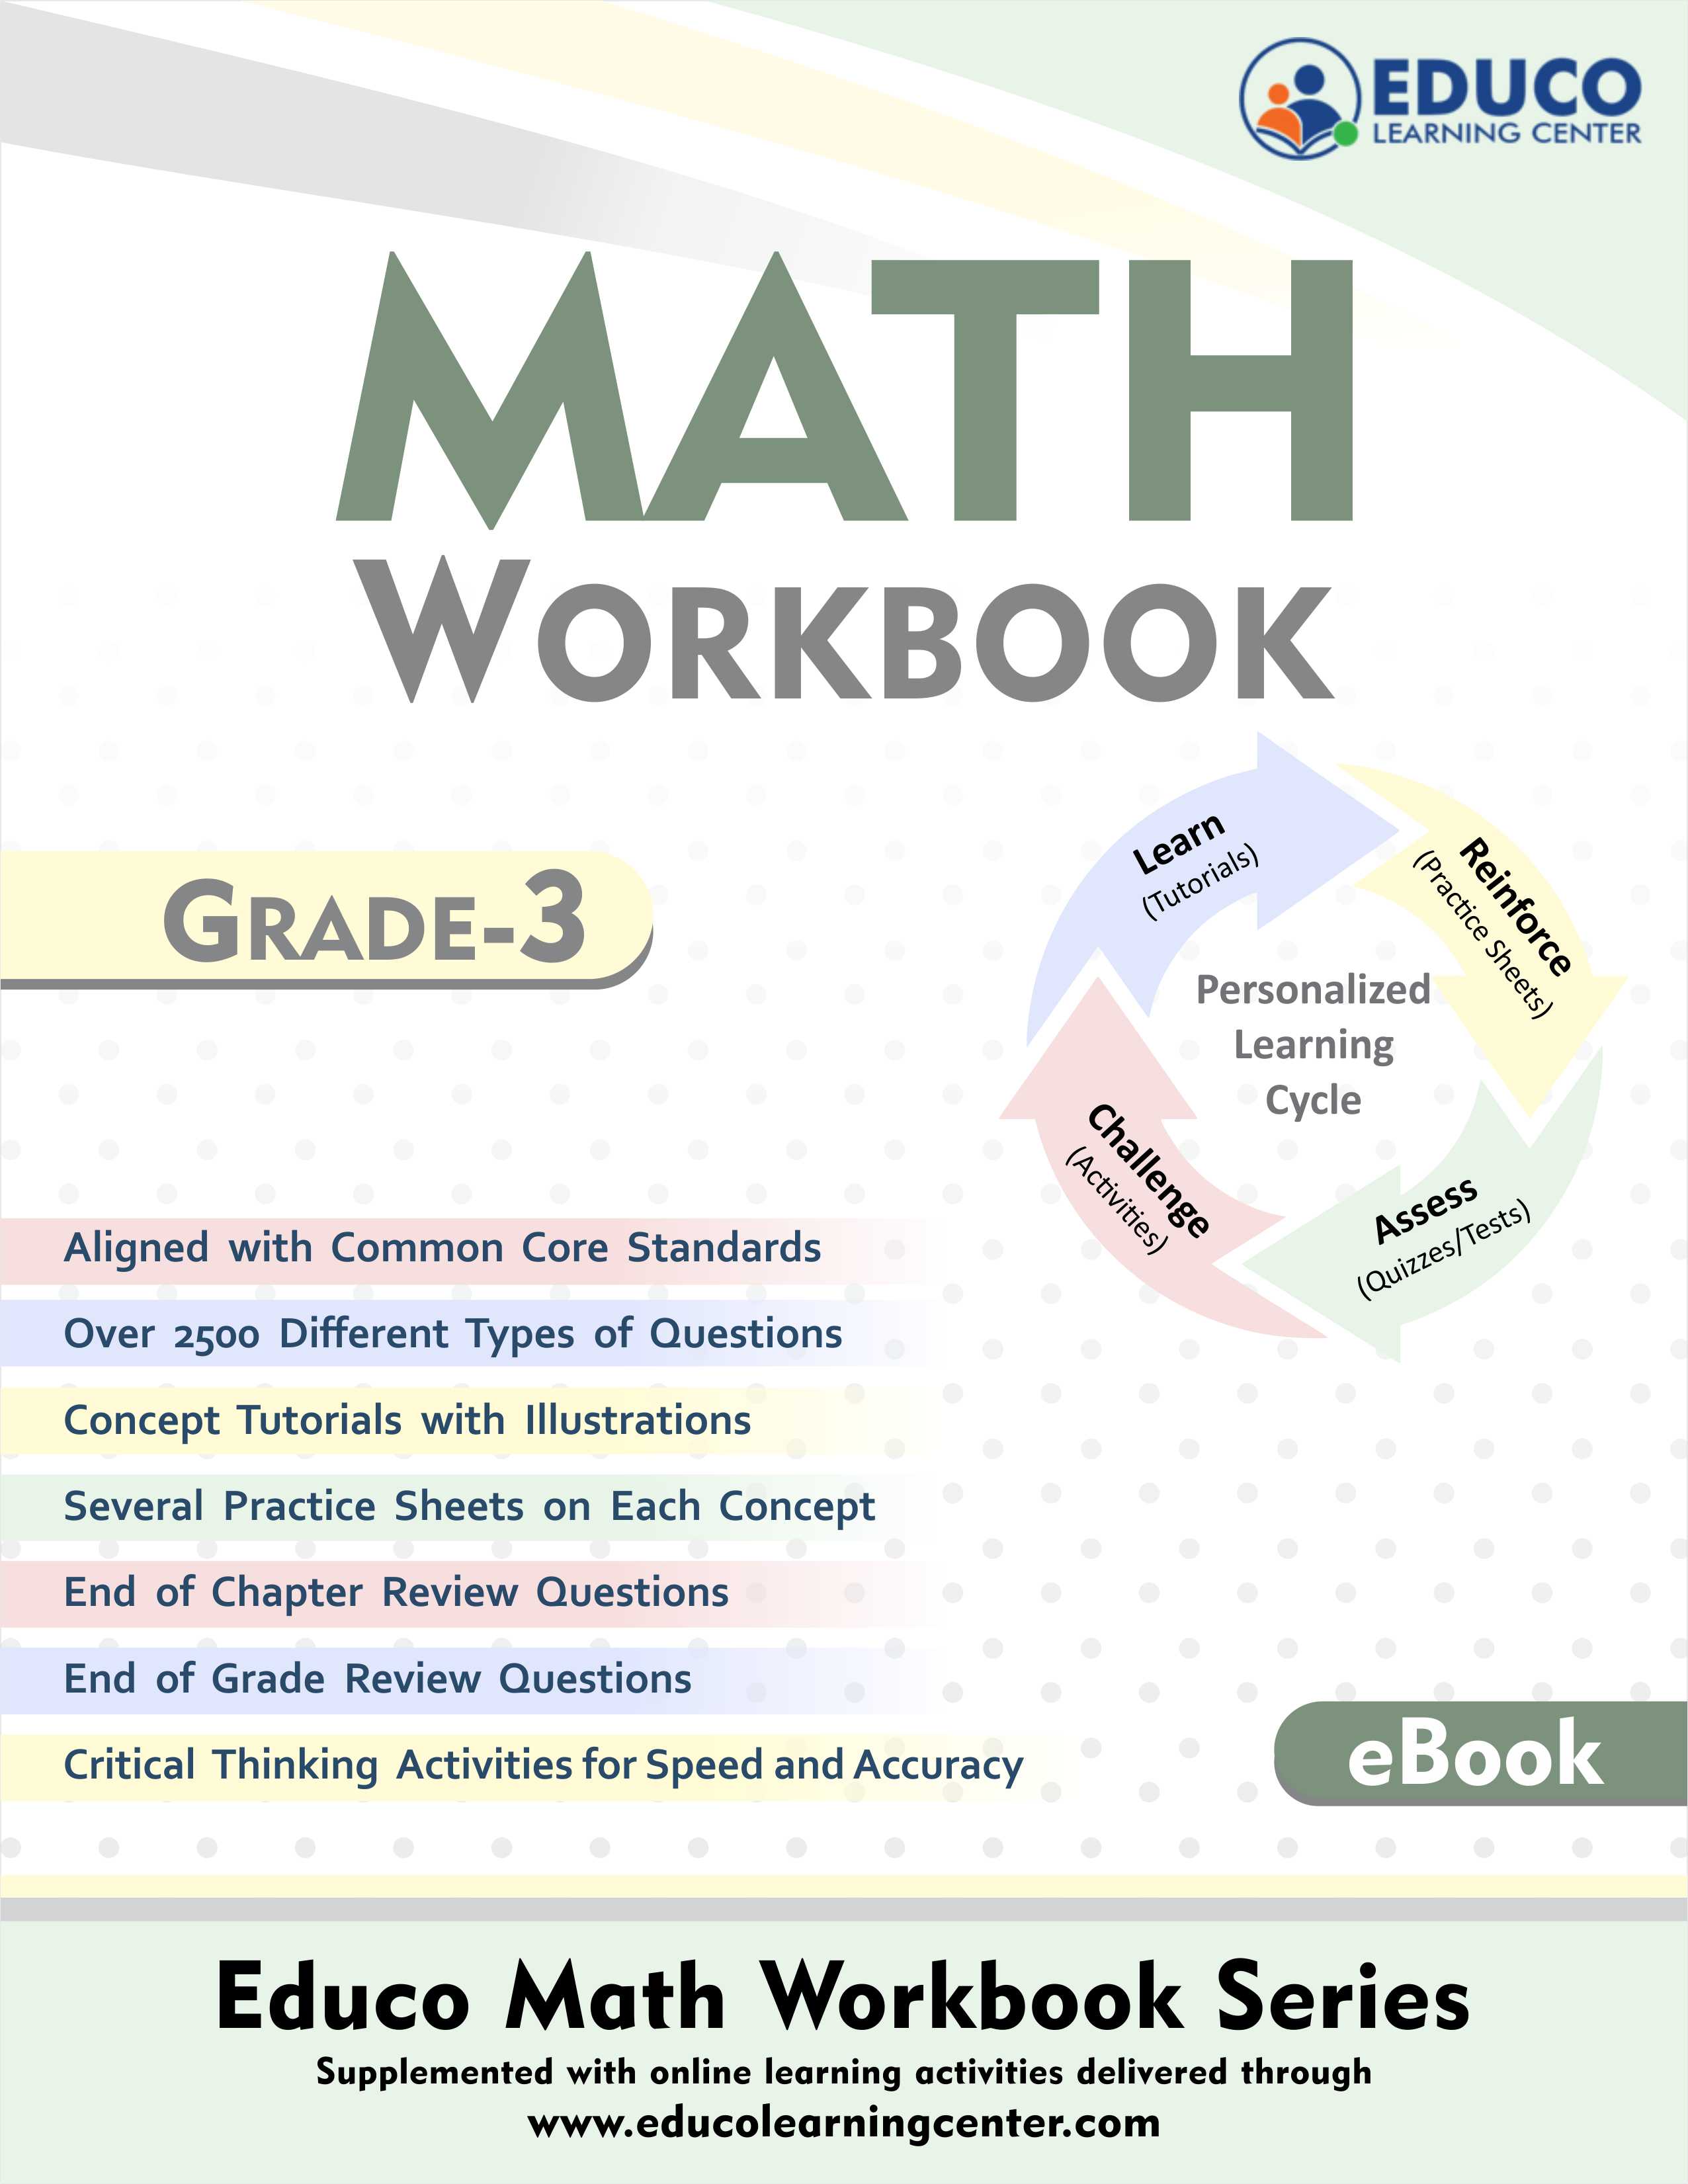 Grade 3 Math Printable Workbook including over 2500 Different types of Math Questions